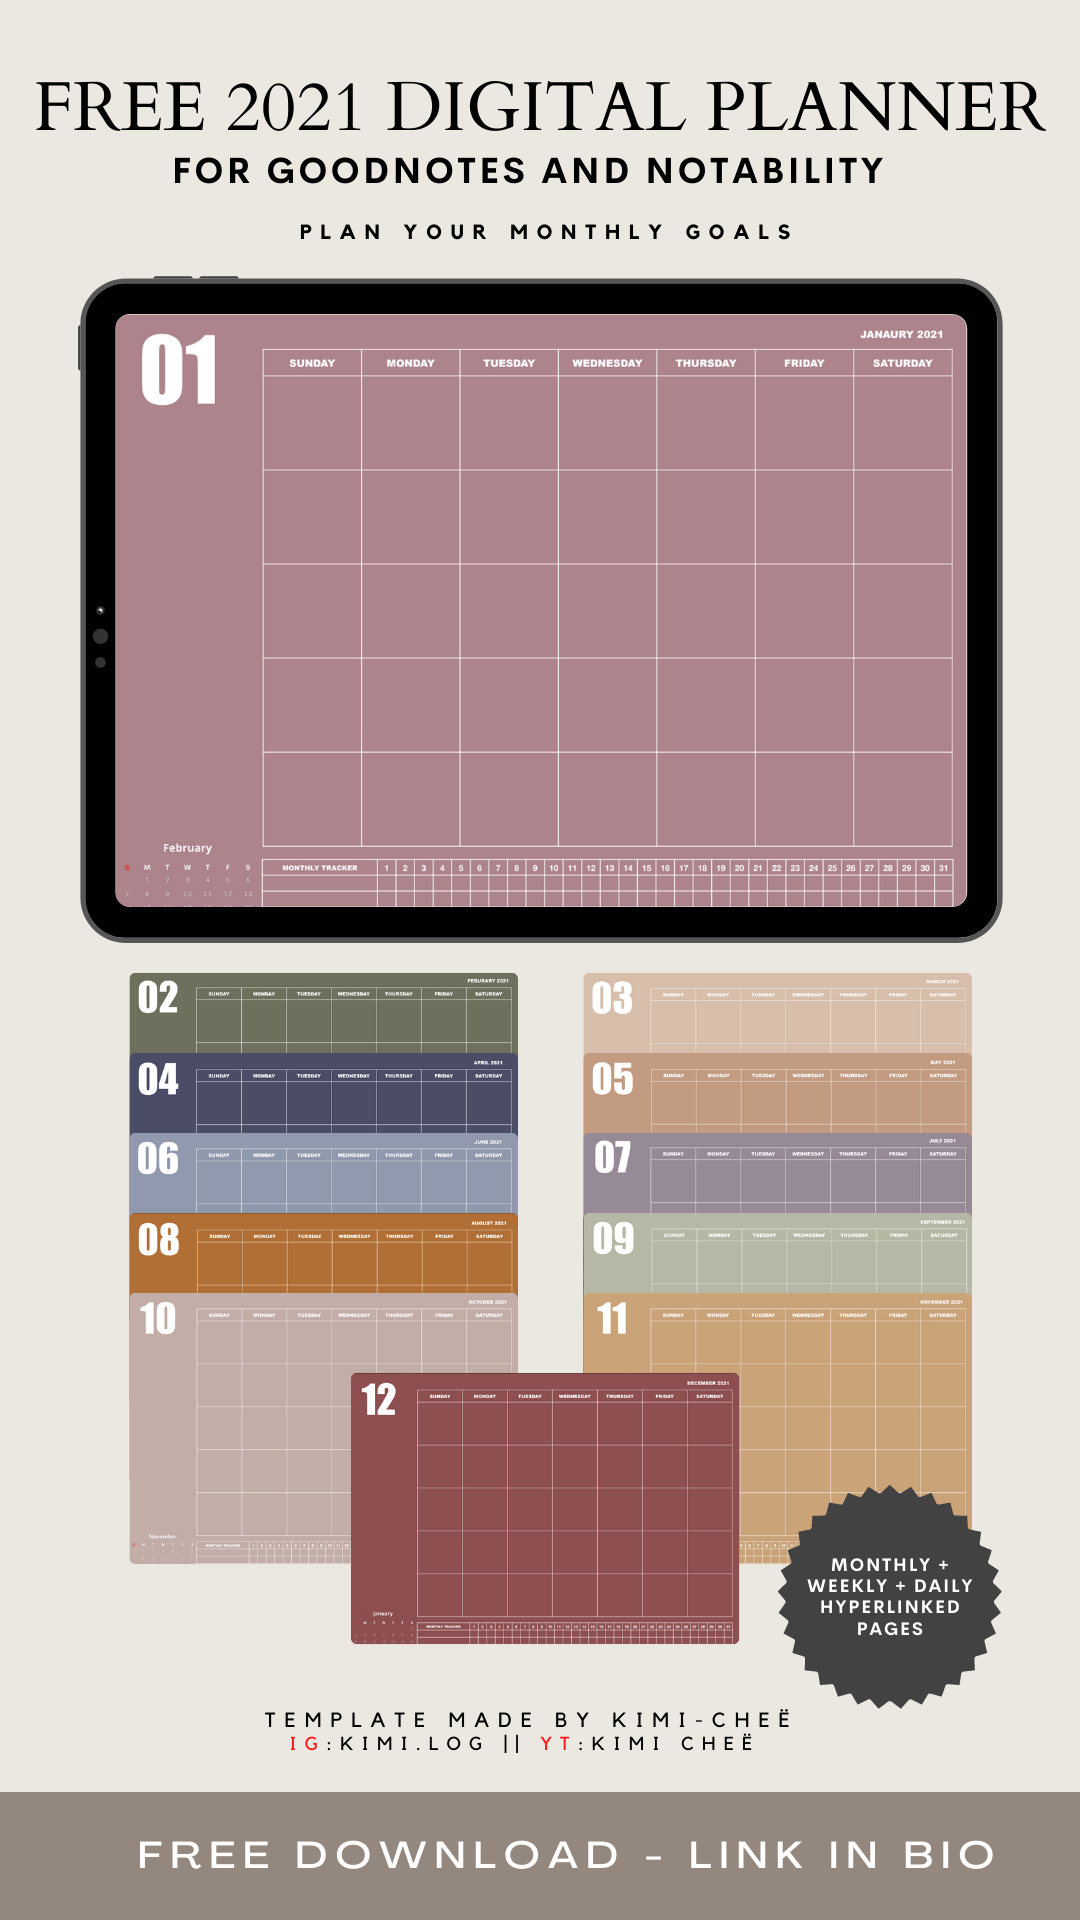 0844 ColourMe iPad 2021 Digital Daily GoodNotes Planner: Sunday start Notability XODO Android Windows hyperlinks stickers